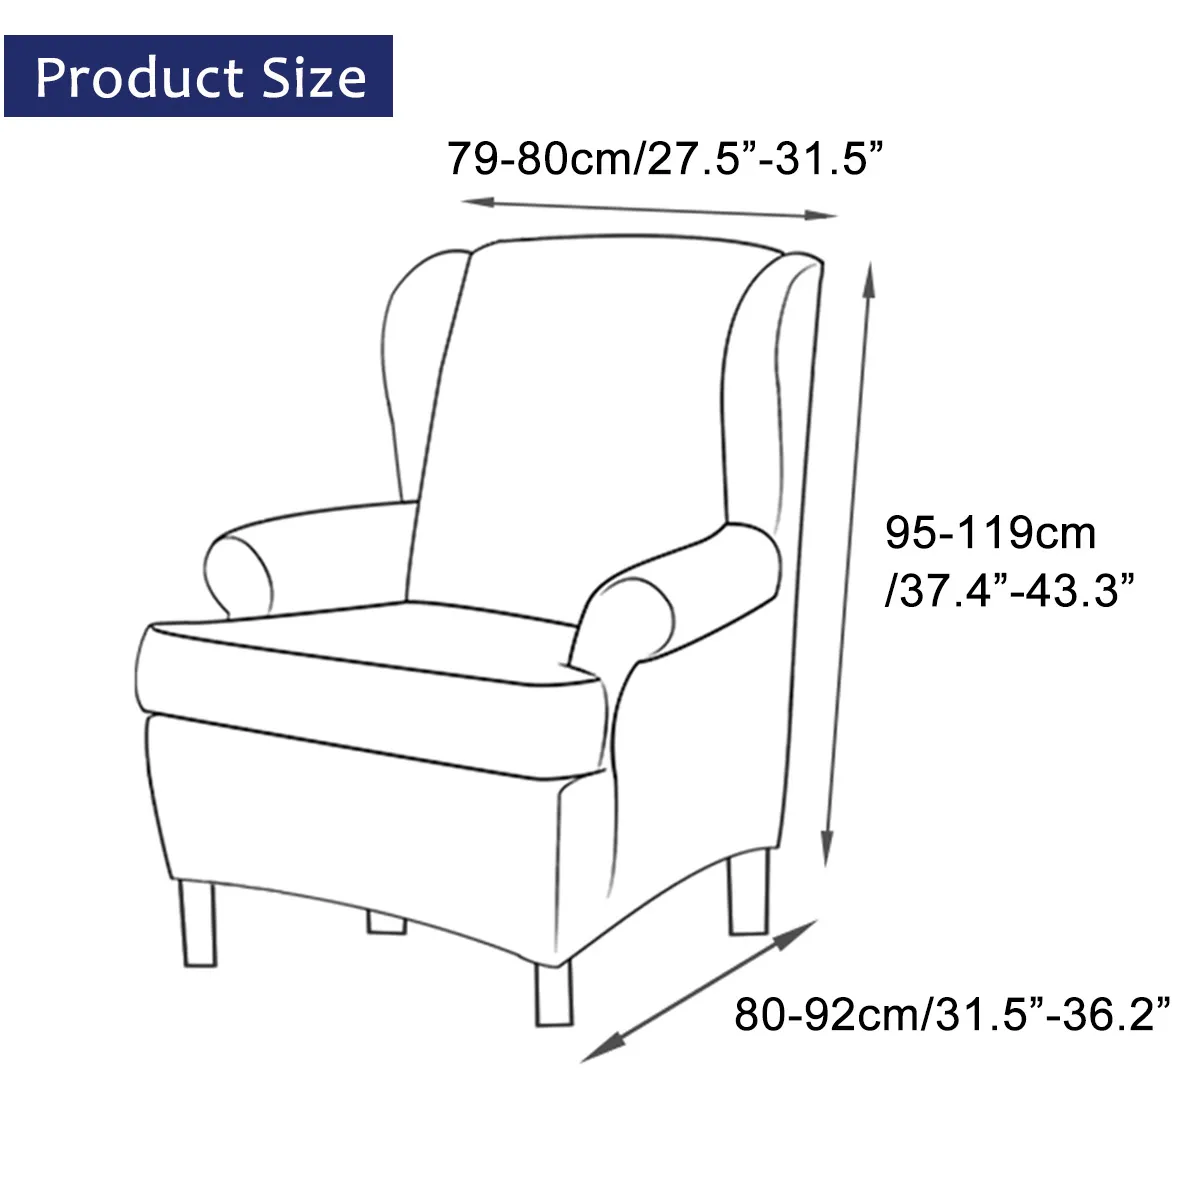 Sloping Arm King Back Stol Cover Elastic fåtölj Wingback Chair Wing Back Stol Cover Stretch Protector Slipcover Protector Y2001930535